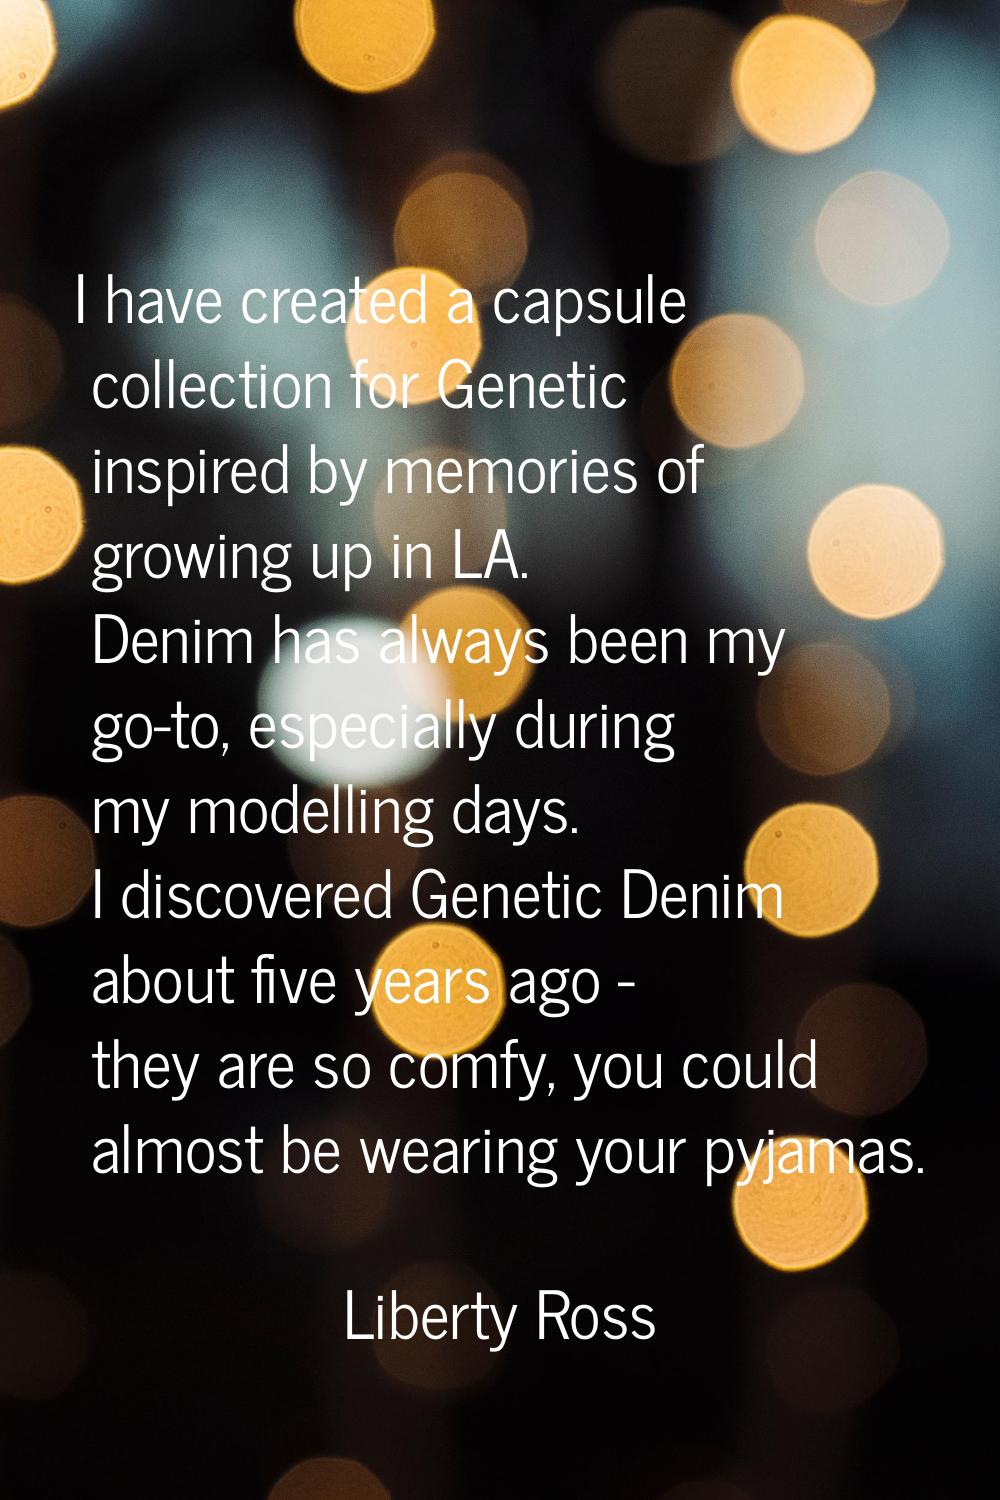 I have created a capsule collection for Genetic inspired by memories of growing up in LA. Denim has